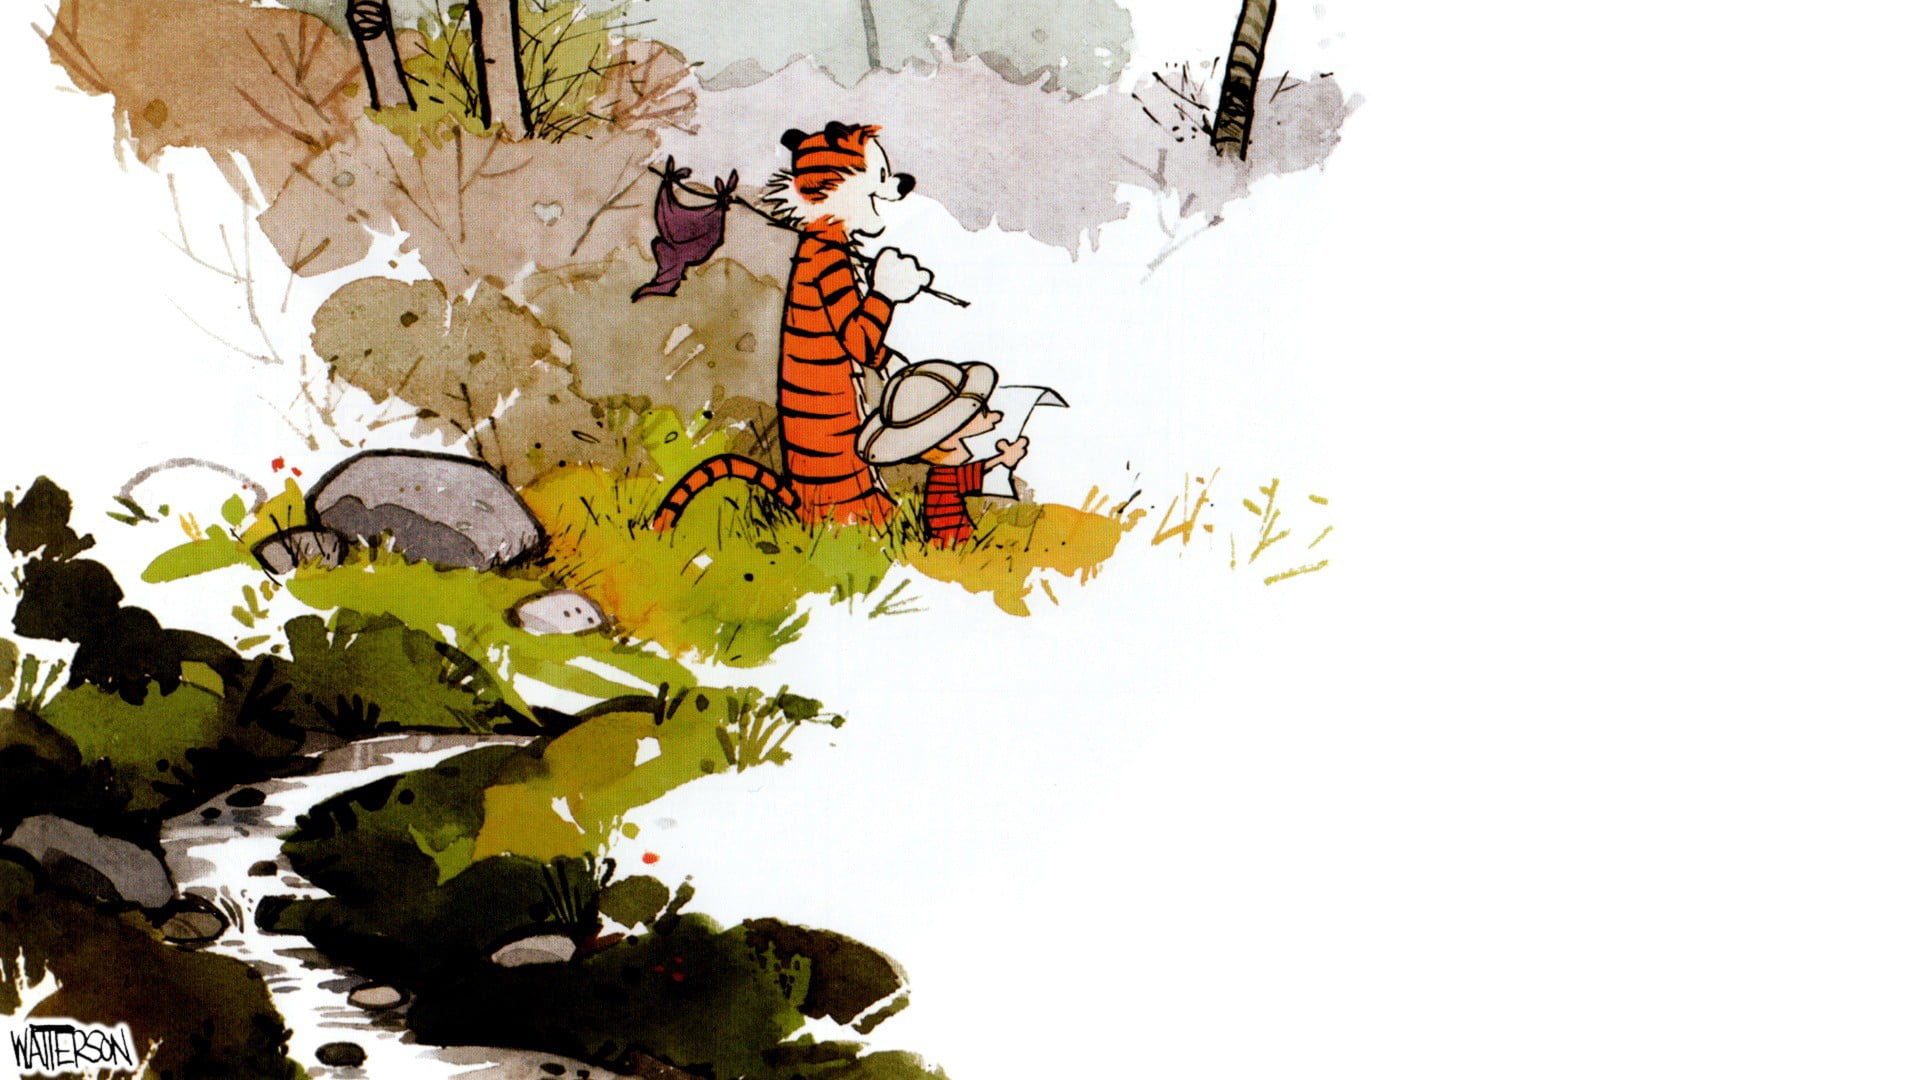 tiger standing near boy painting, Calvin and Hobbes, comics, exploration